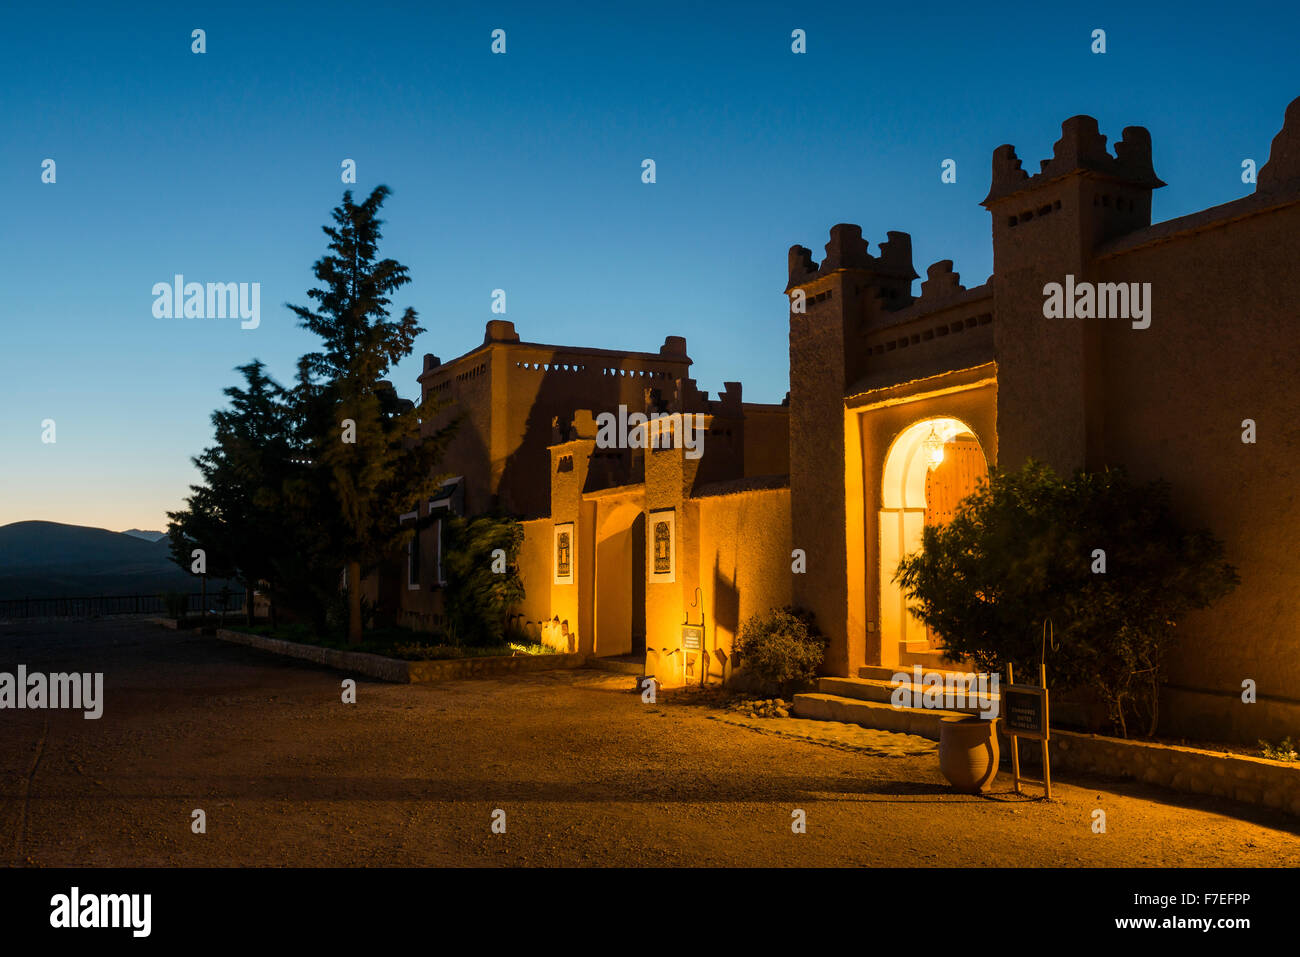 Kasbah style hotel at twilight, blue hour, Boumalne-du-Dades, Dades Valley, Morocco Stock Photo